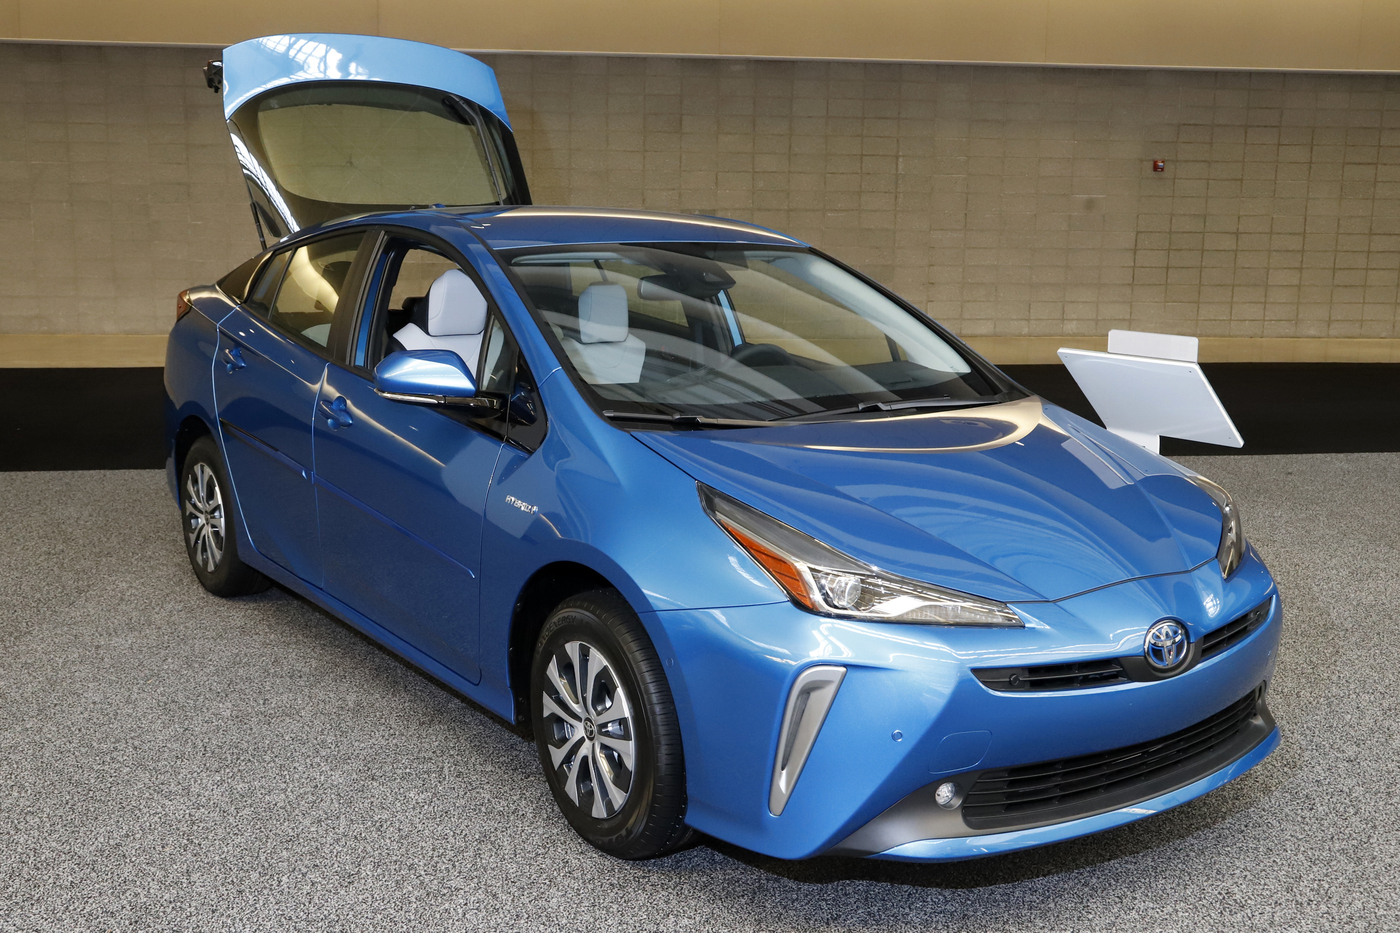 This is a 2020 Toyota Prius on display at the 2020 Pittsburgh International Auto Show Thursday, Feb.13, 2020 in Pittsburgh. (AP Photo/Gene J. Puskar)